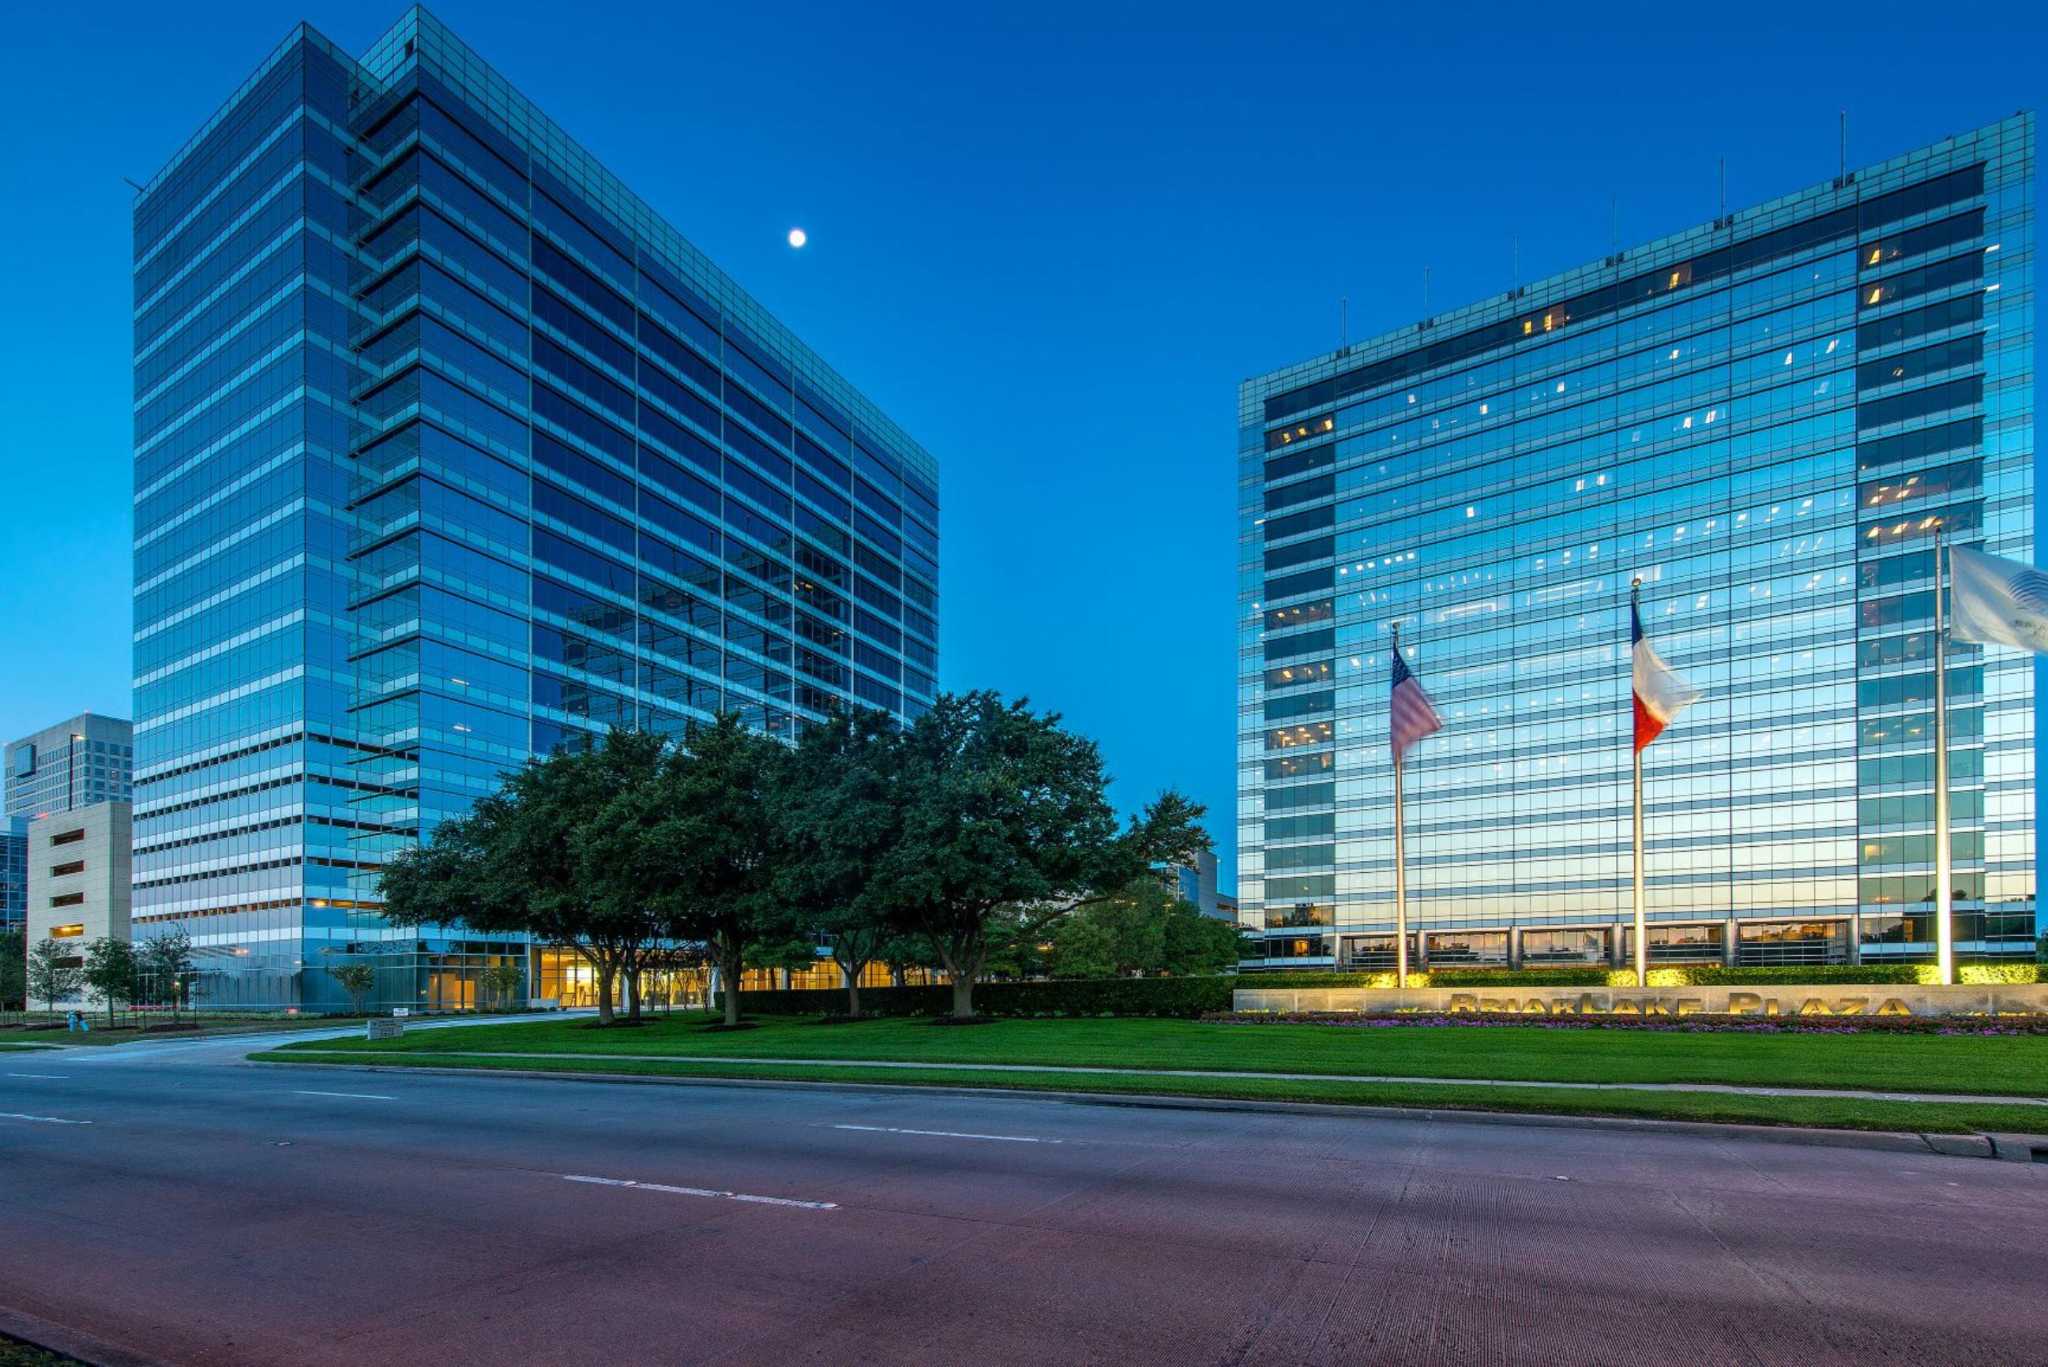 Houston Galleria Renovation & Expansion - Cooper Carry